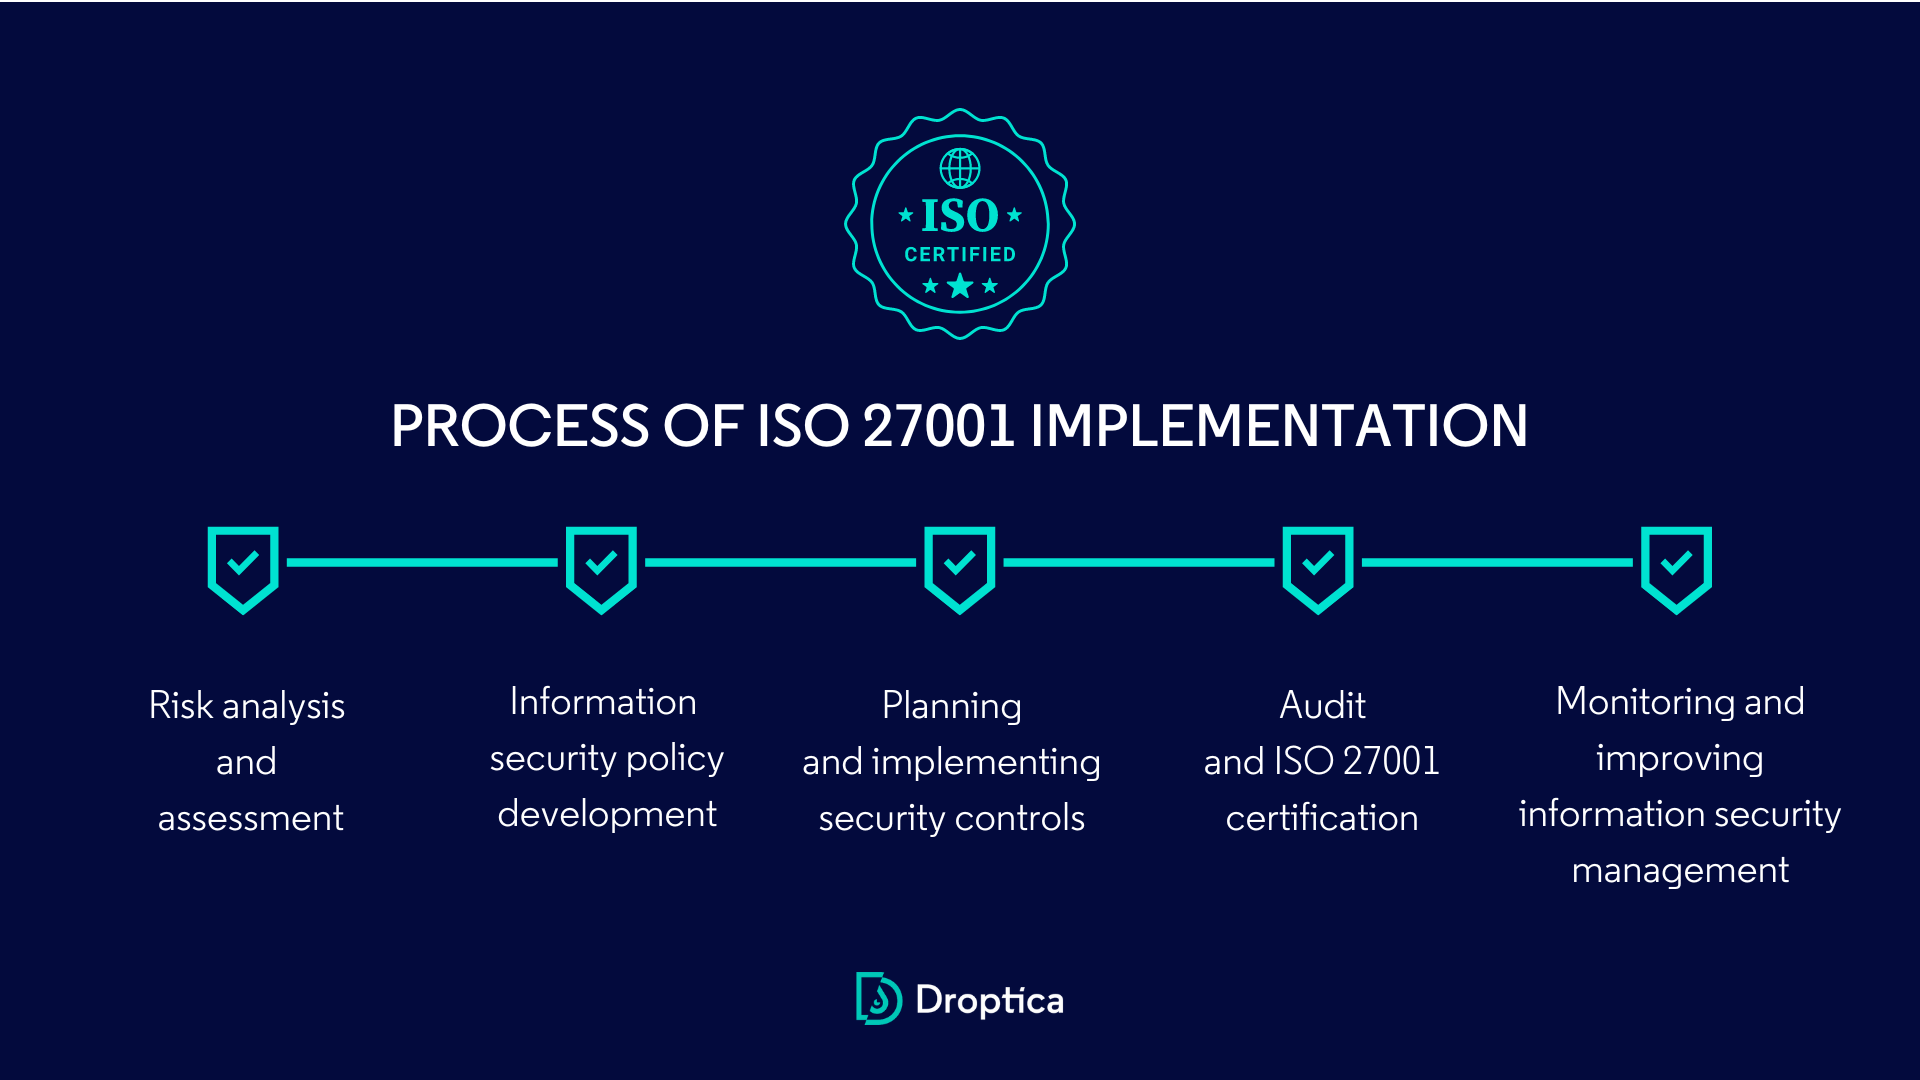 ISO 27001 implementation consists of several stages that culminate in the official certification.